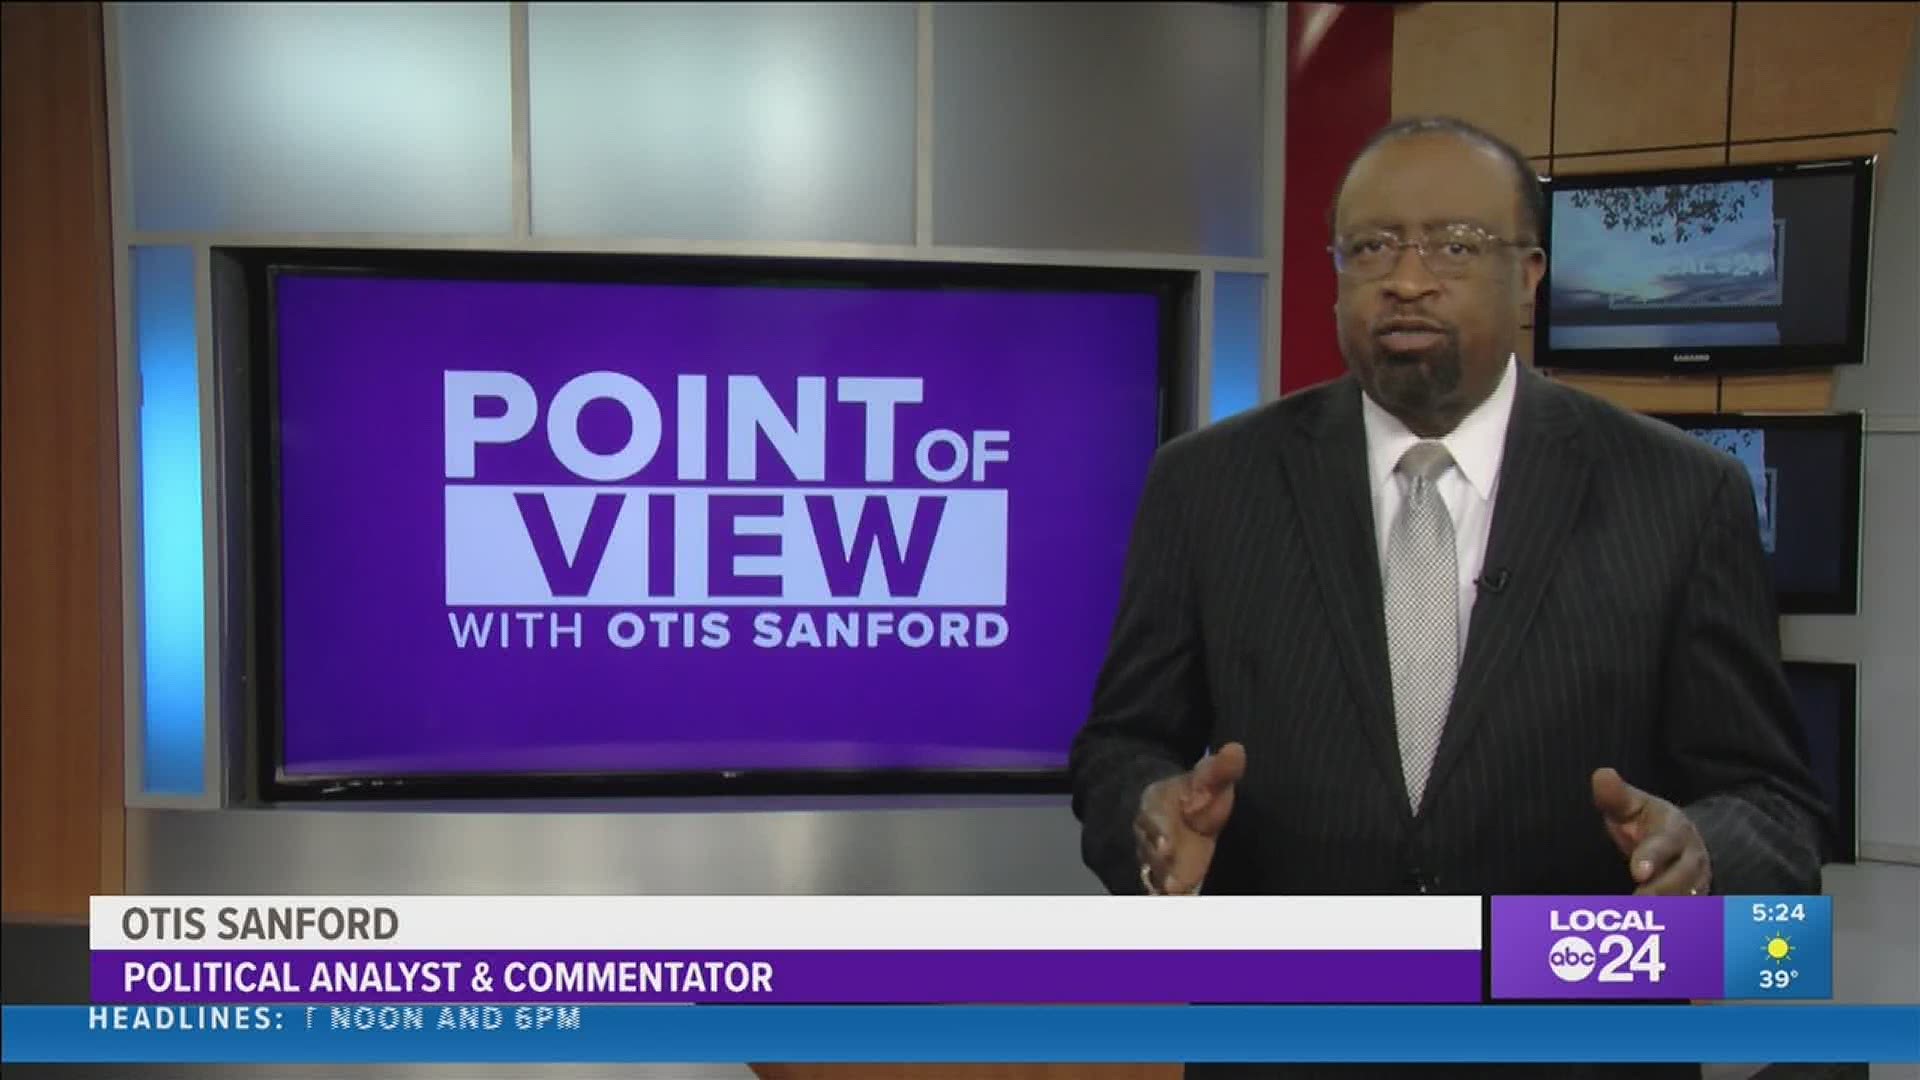 Local 24 News political analyst & commentator Otis Sanford shares his point of view on companies suspending donations to some GOP lawmakers.